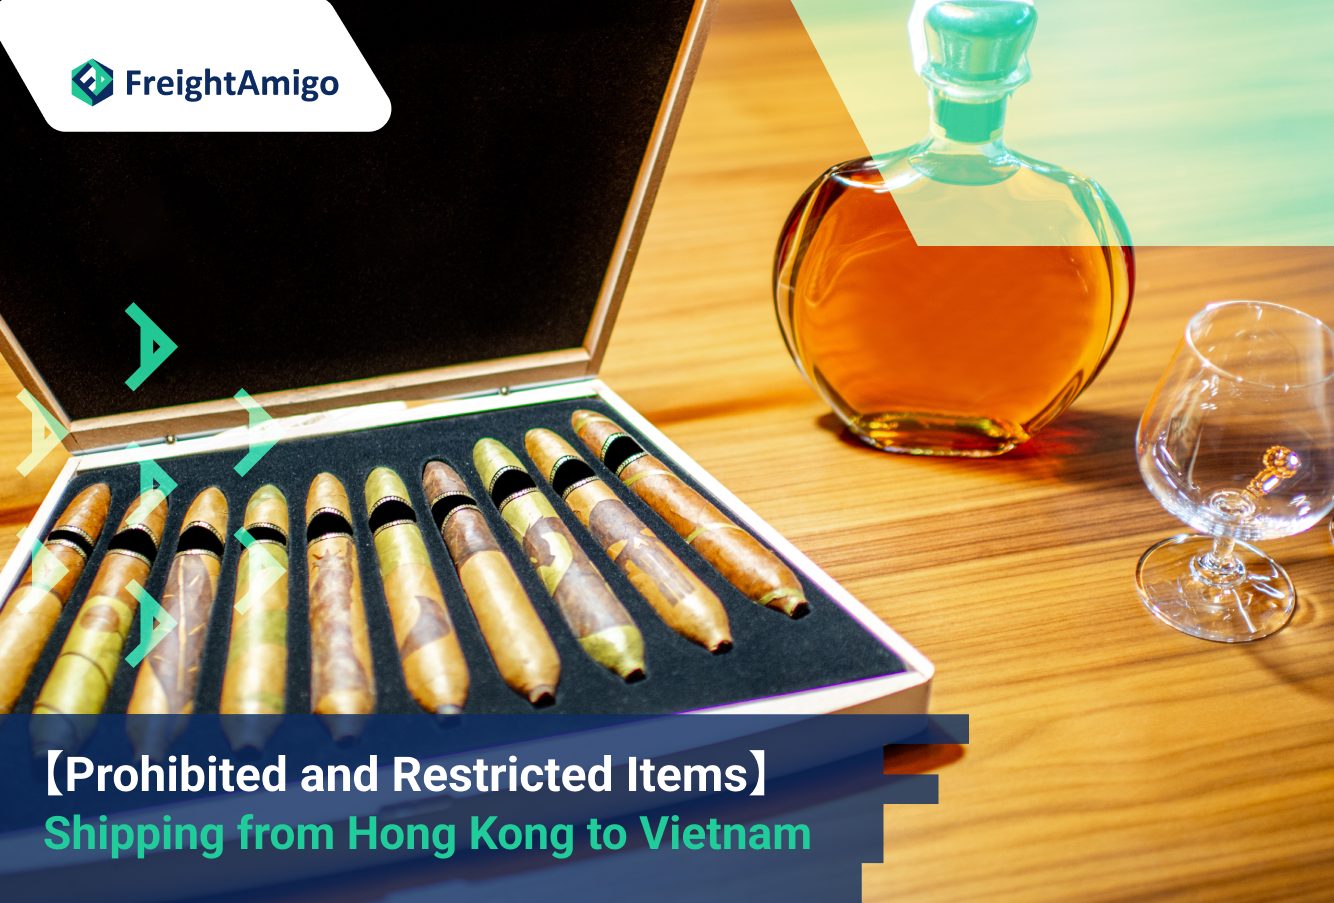 Prohibited and Restricted Items: Shipping from Hong Kong to Vietnam